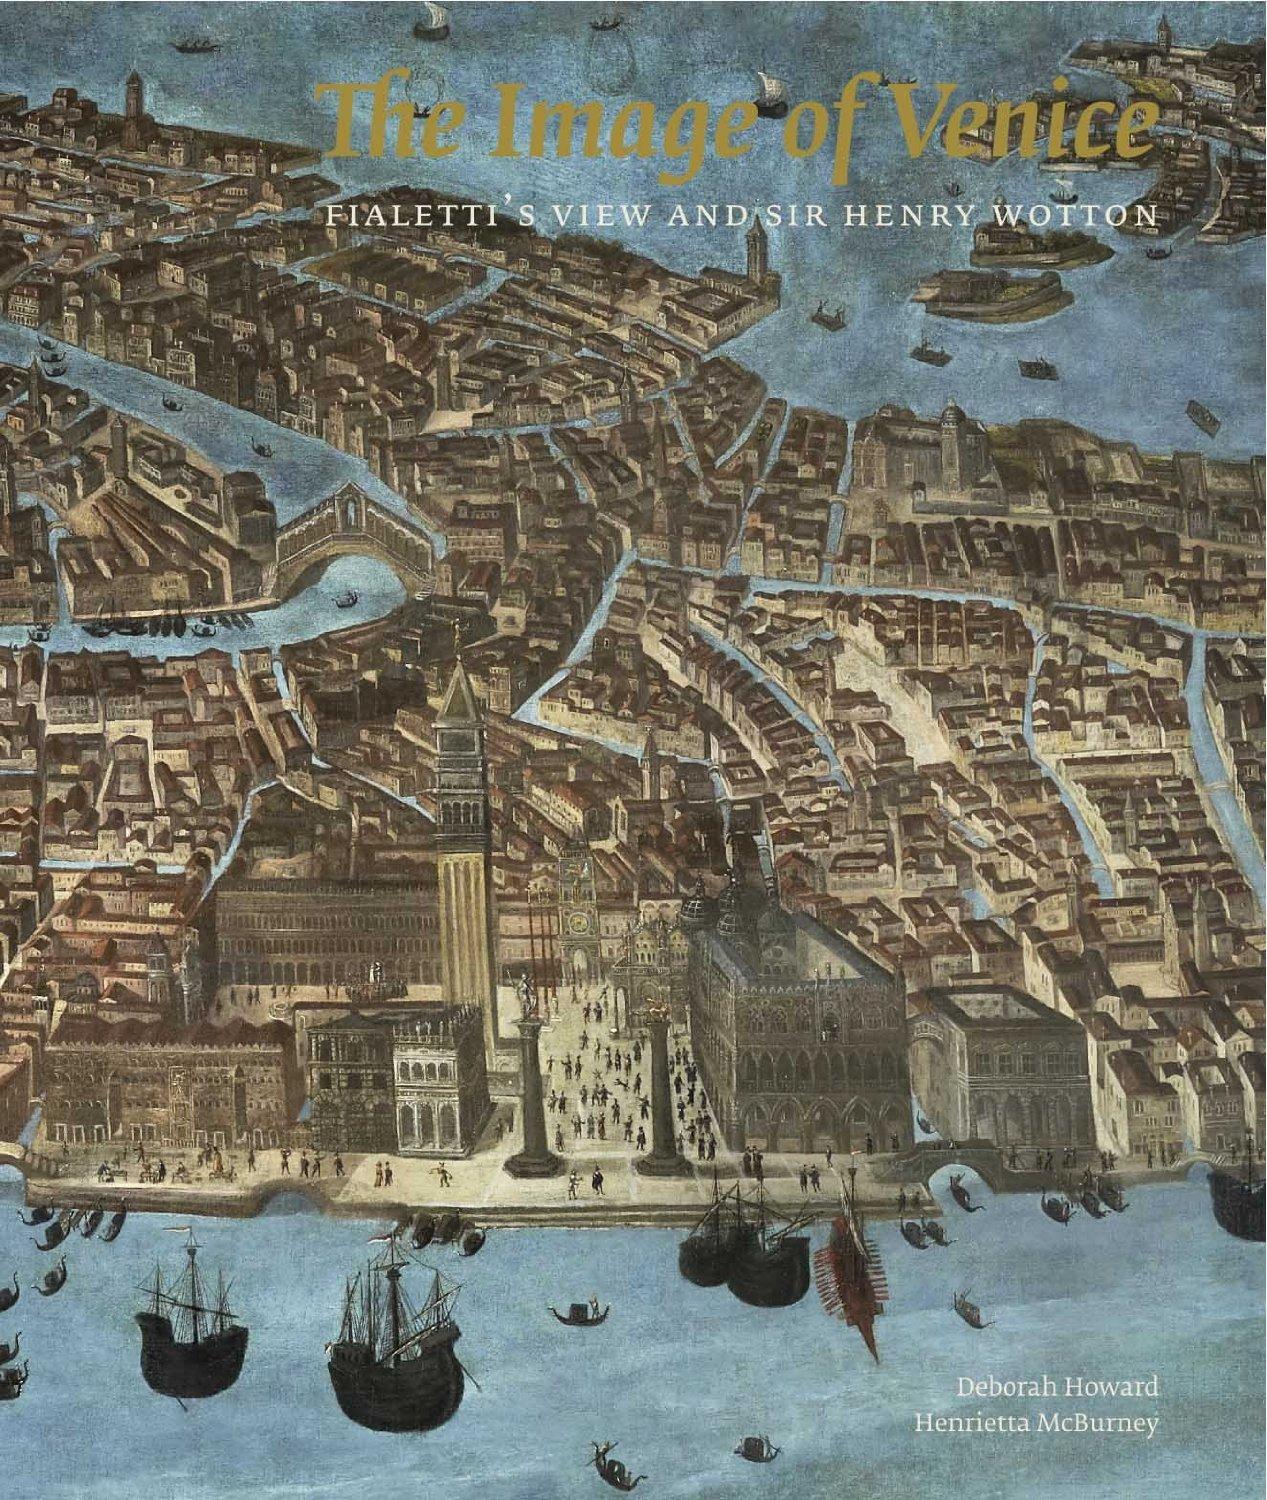 'The Image of Venice: Fialetti's View and Sir Henry Wotton': a new book by Deborah Howard and Henrietta McBurney